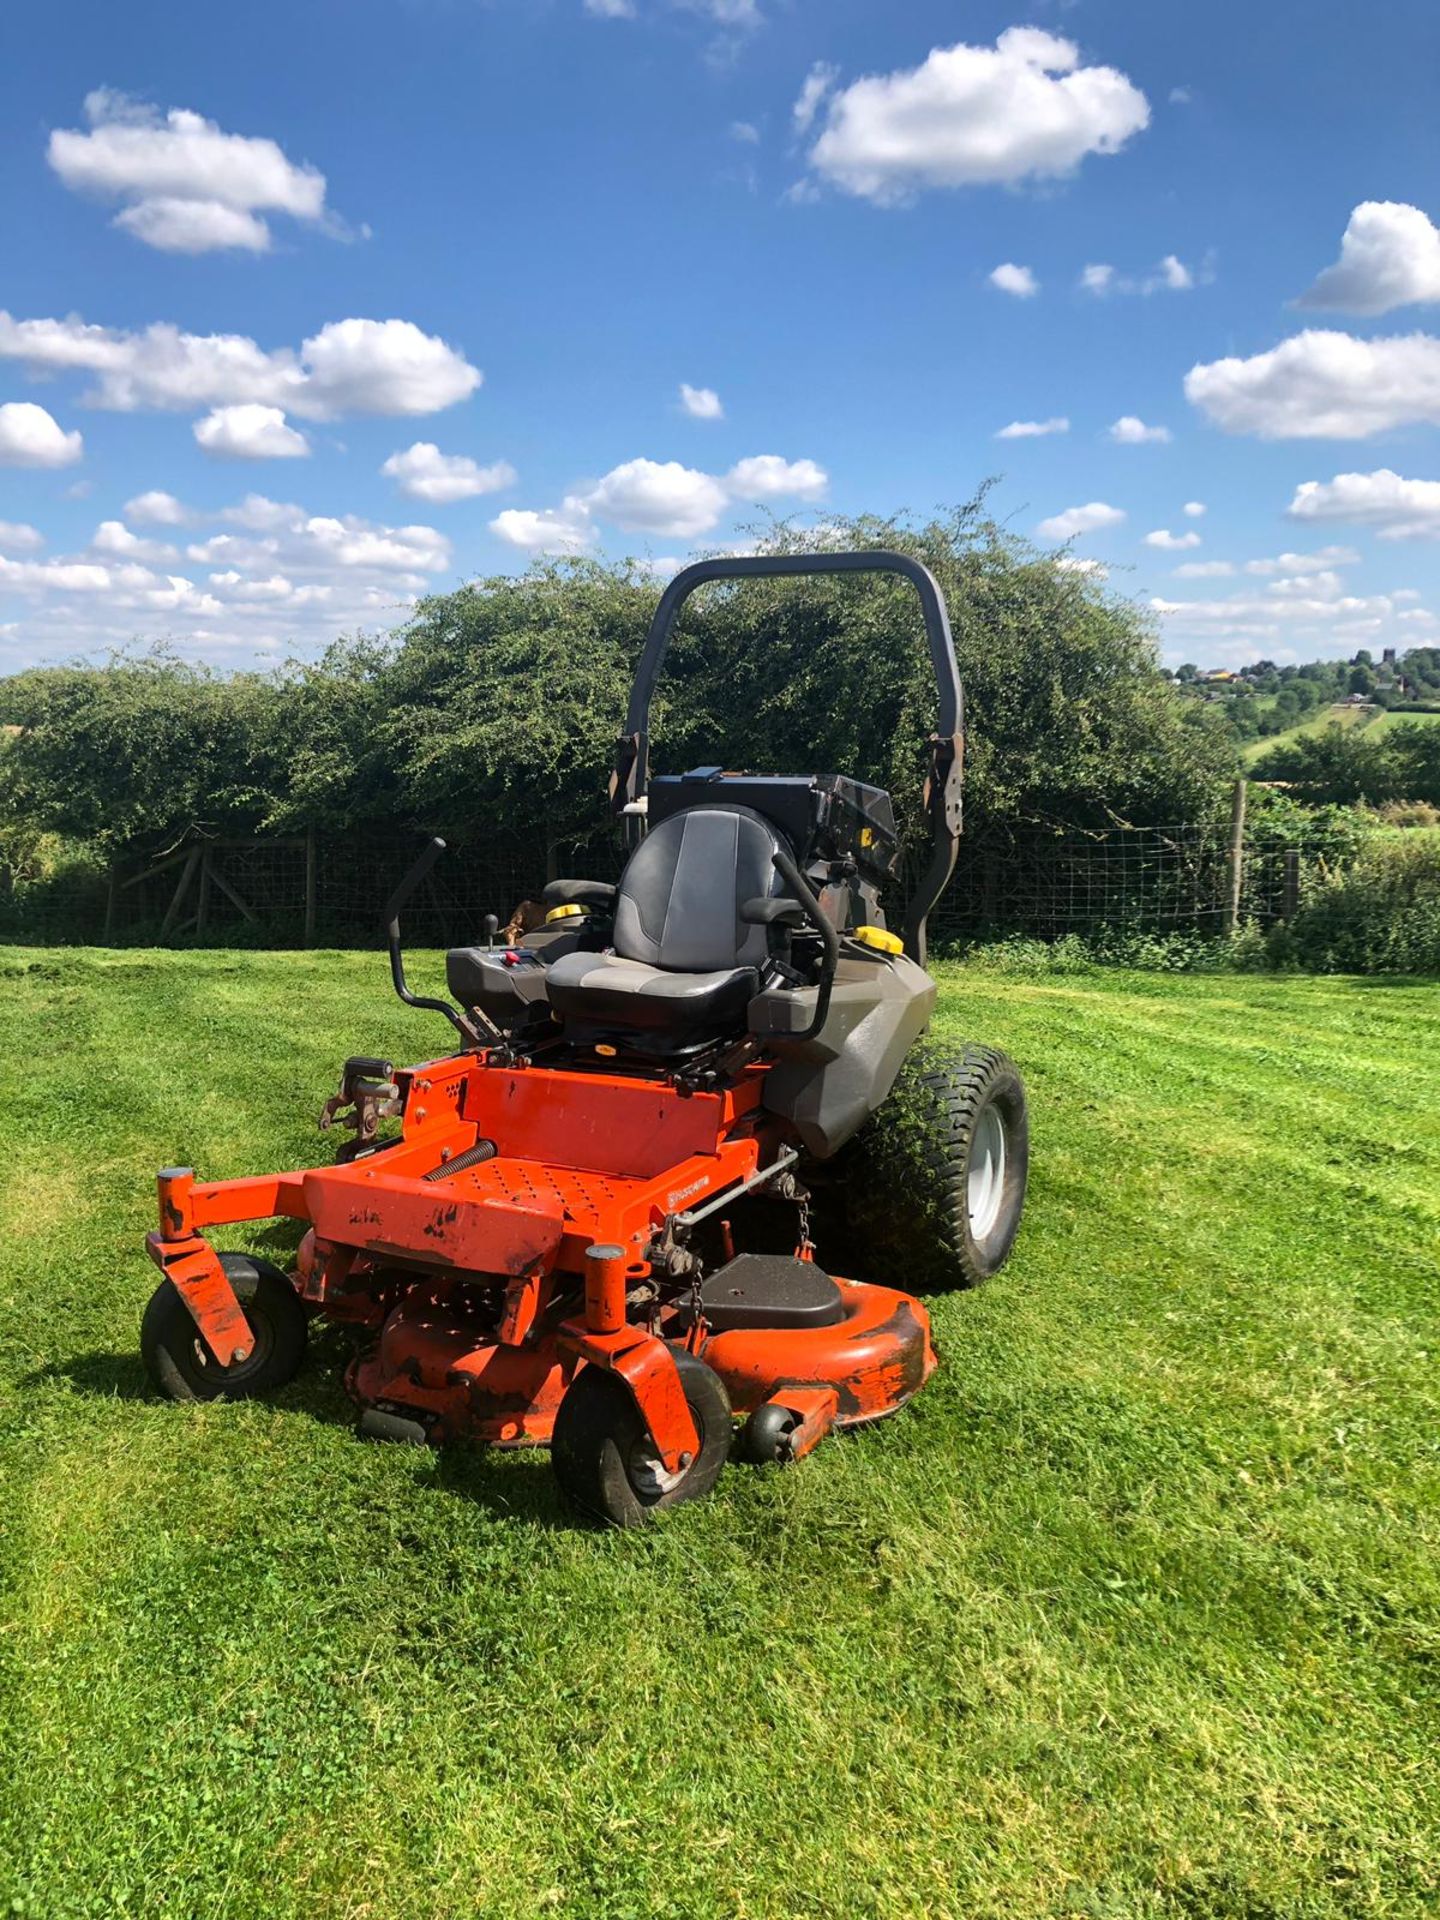 HUSQVARNA ZERO TURN RIDE ON LAWN MOWR, RUNS, WORKS AND CUTS, ONLY 900 HOURS FROM NEW *PLUS VAT* - Image 6 of 6